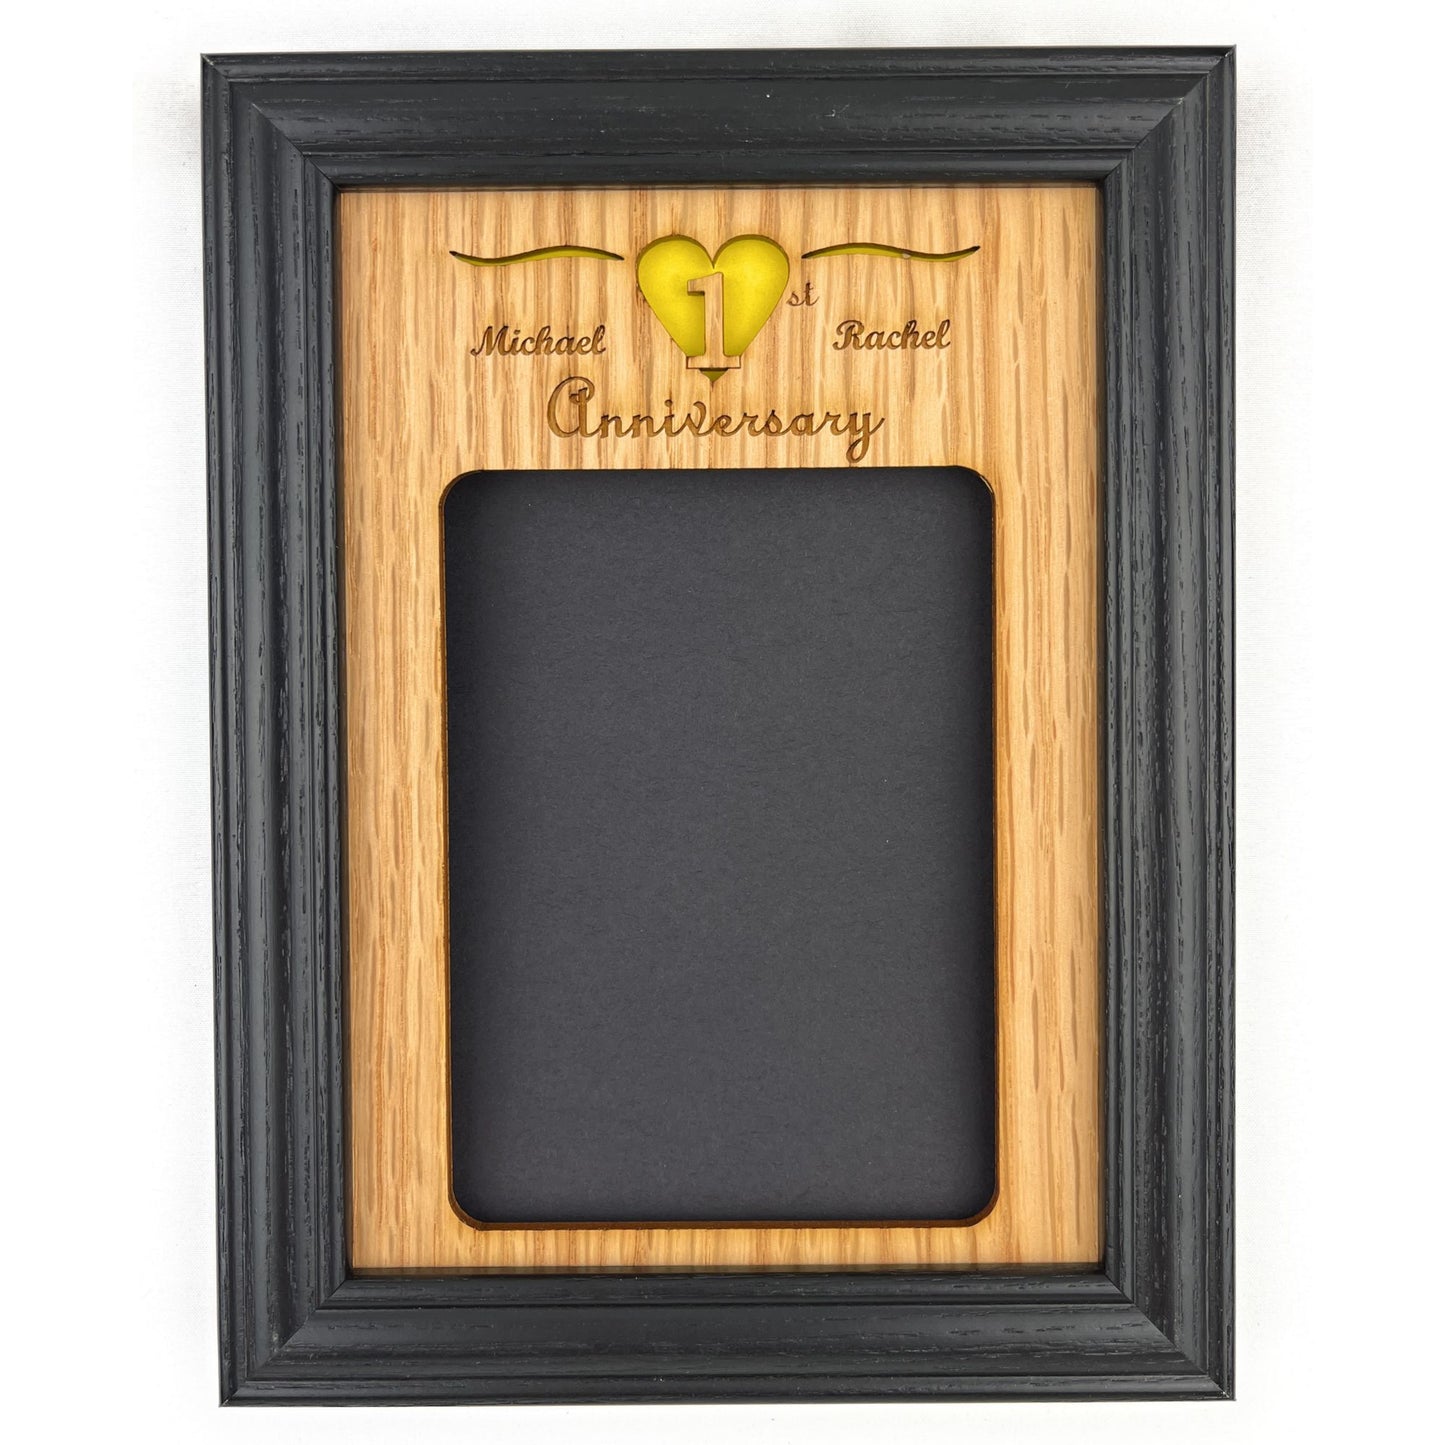 5x7 1st Anniversary Picture Frame holds a 3x4 Photo and can be personalized with your names.